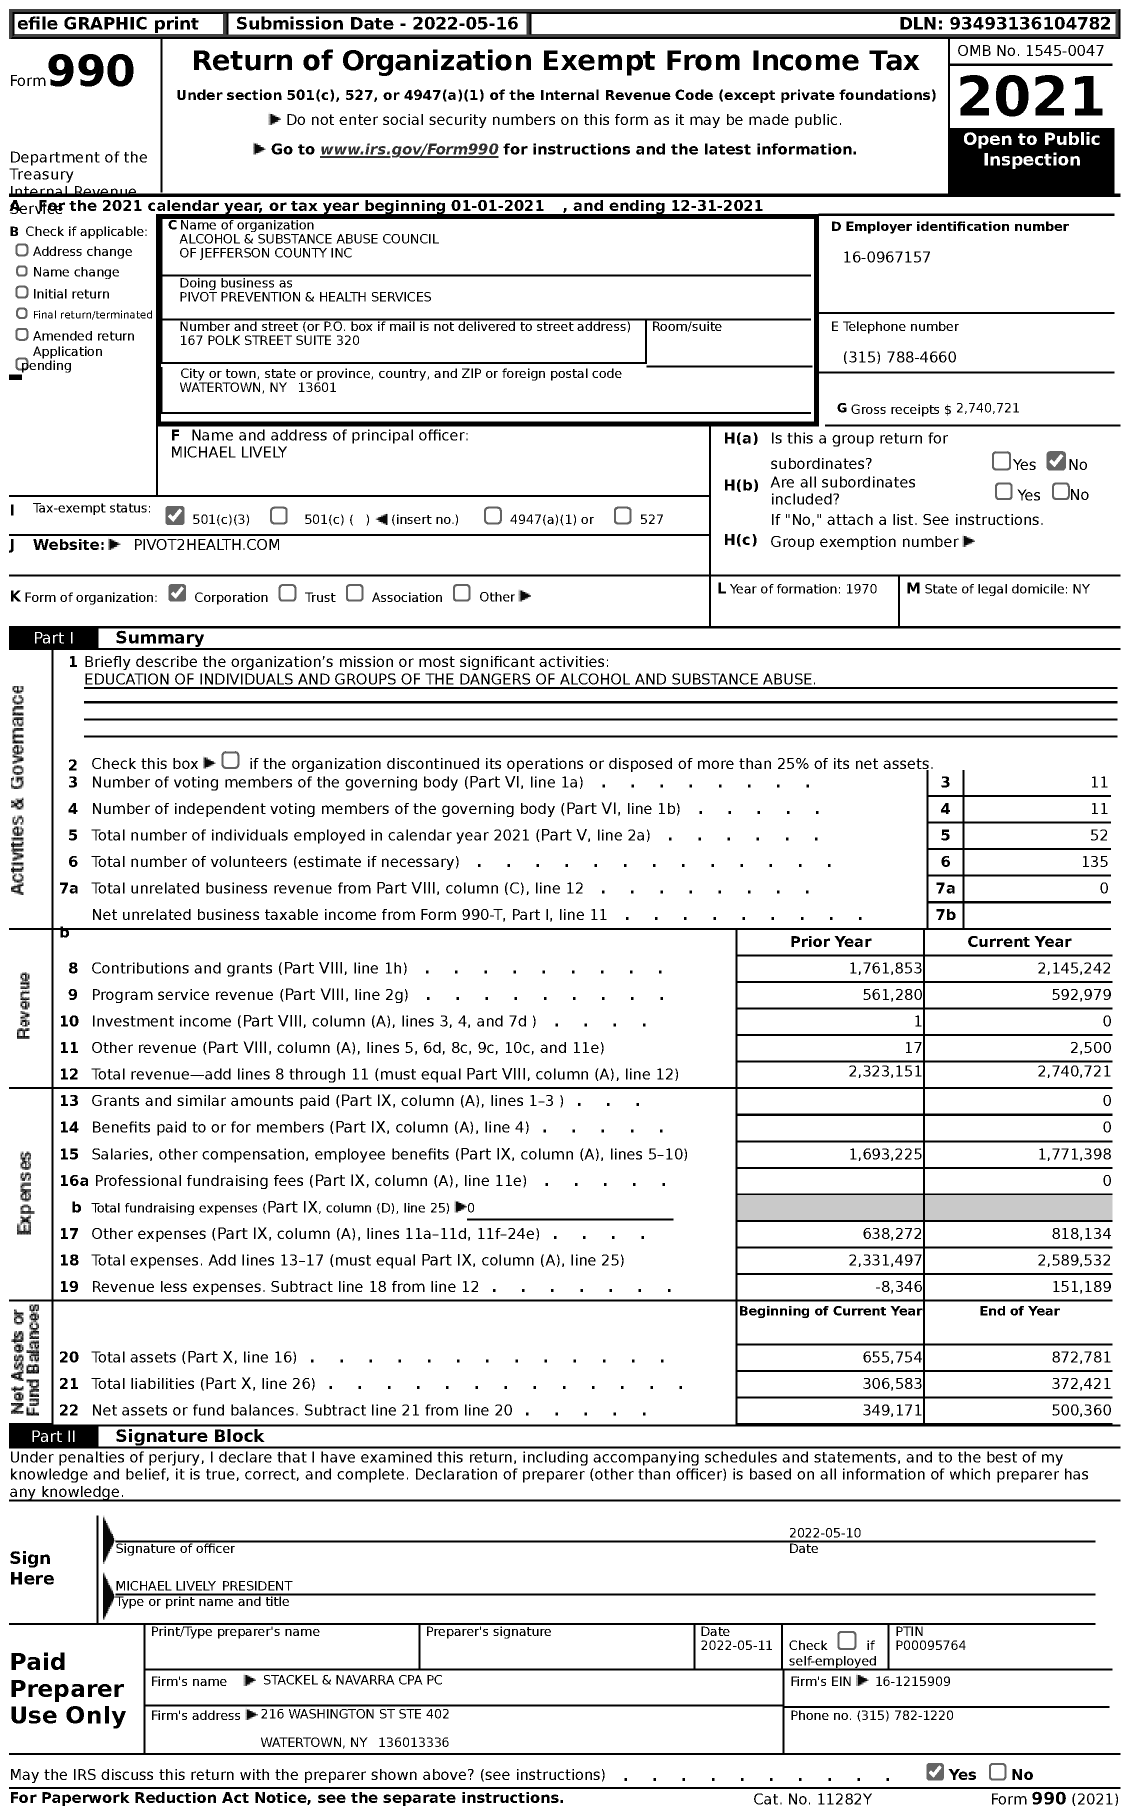 Image of first page of 2021 Form 990 for Pivot Prevention and Health Services